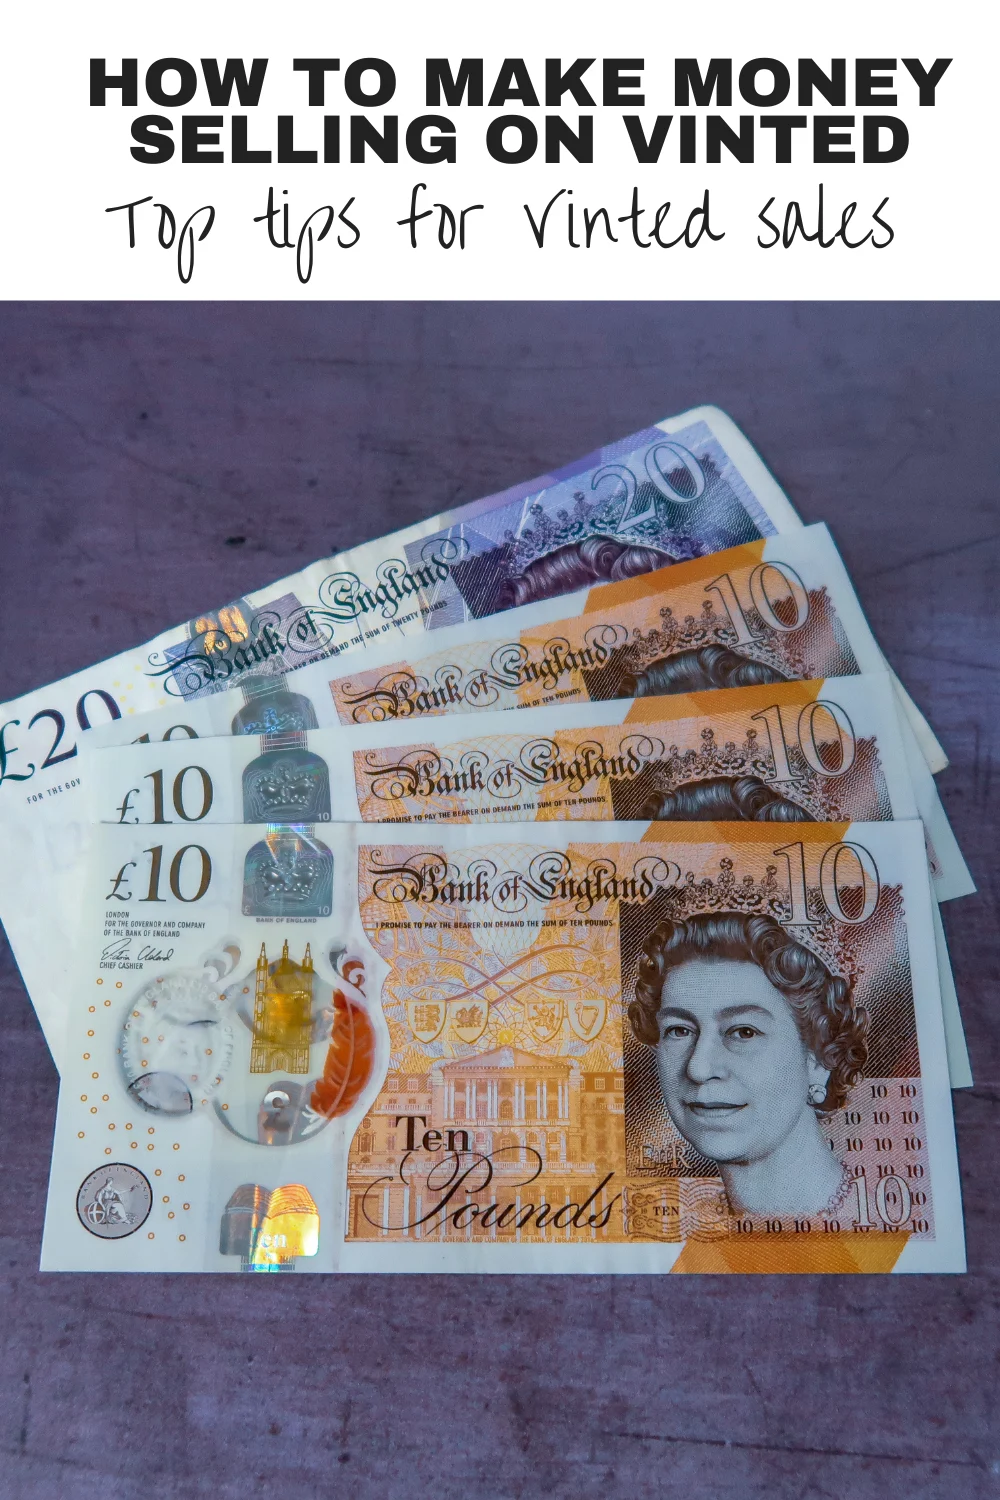 £20 note, 3 x £10 notes. Text overlay says How to make money selling on Vinted - Top Tips for selling on Vinted